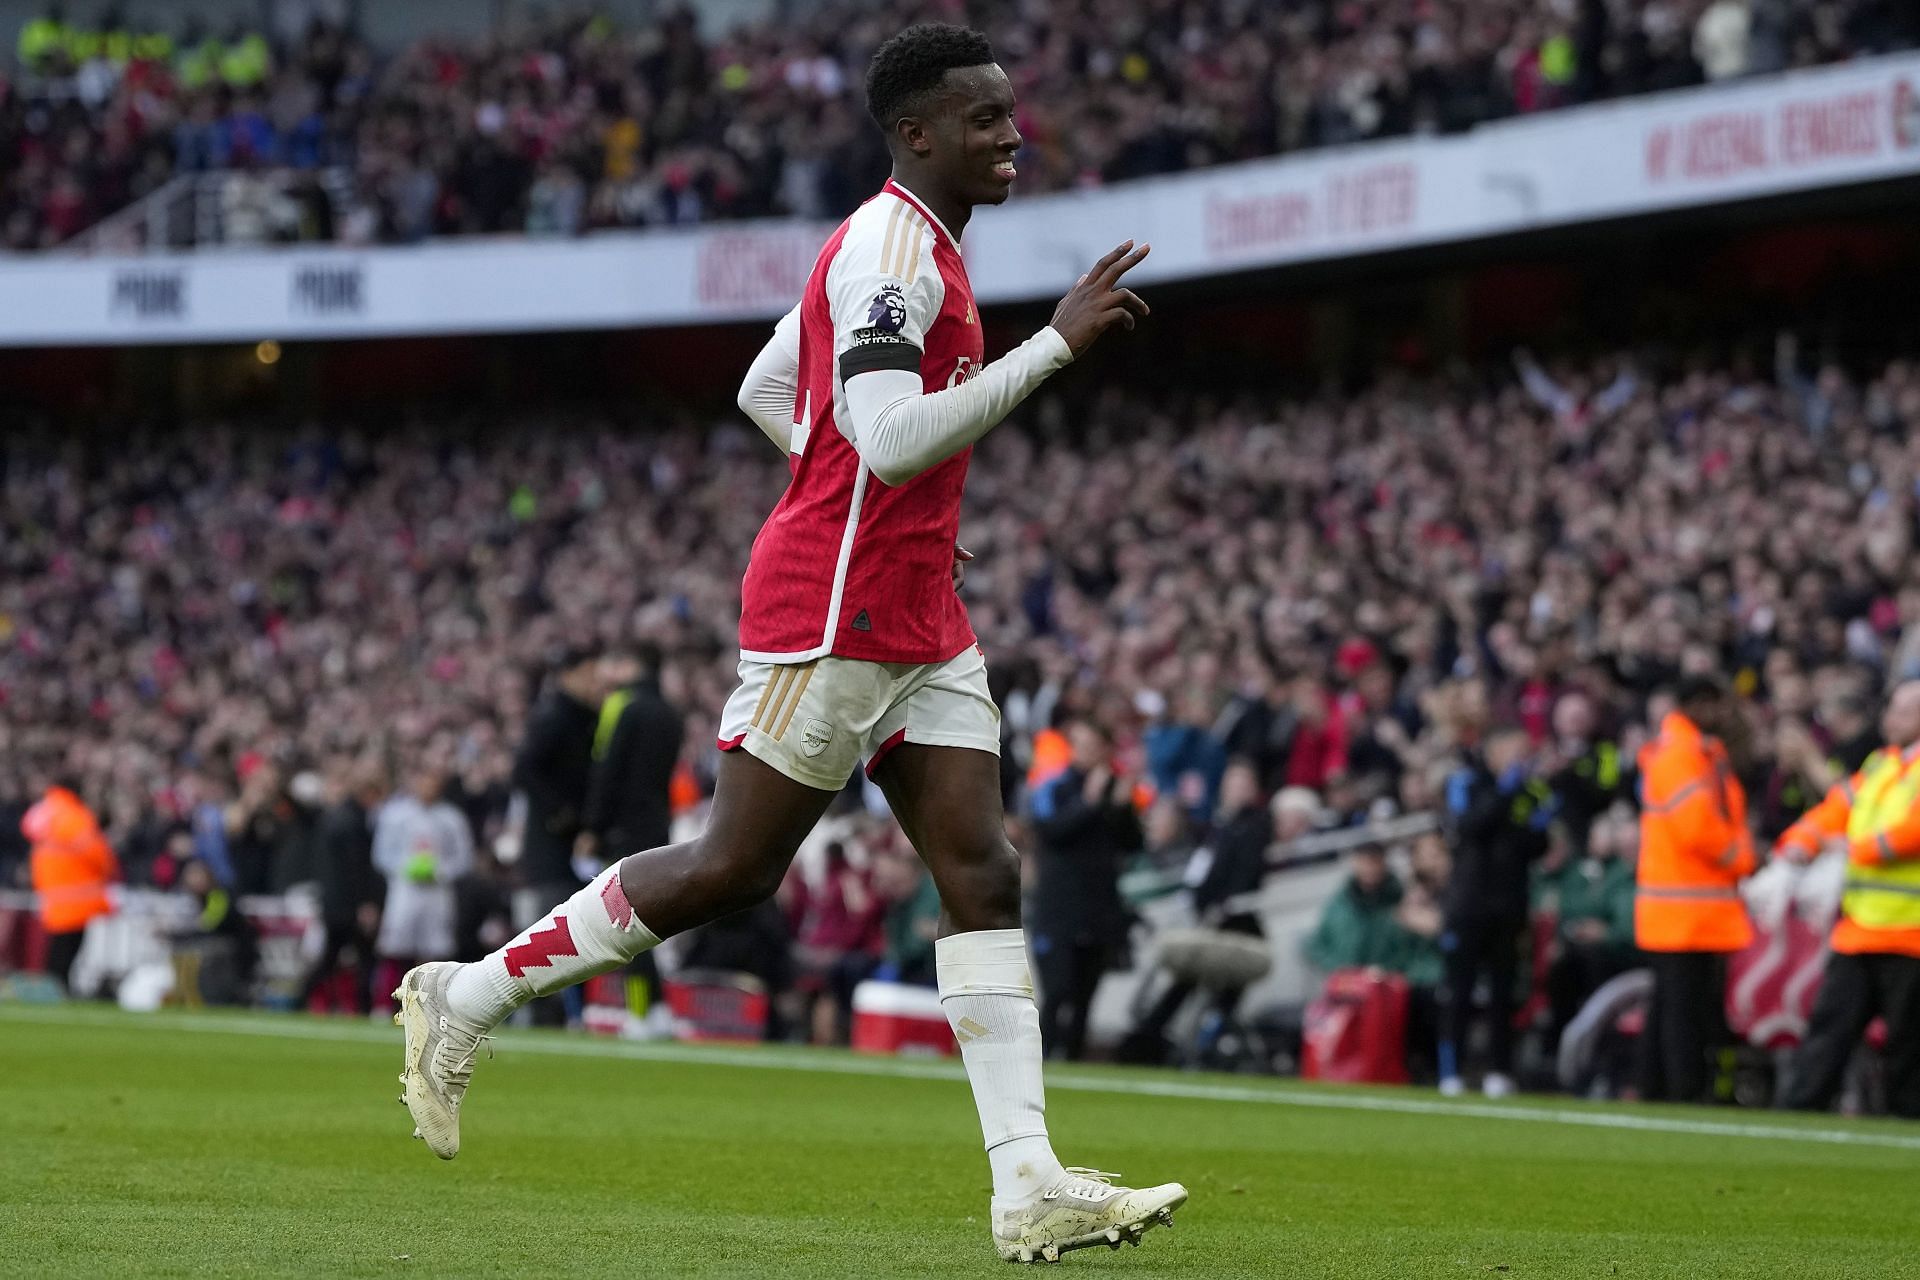 Nketiah completed a sensational hat-trick against the Blades.